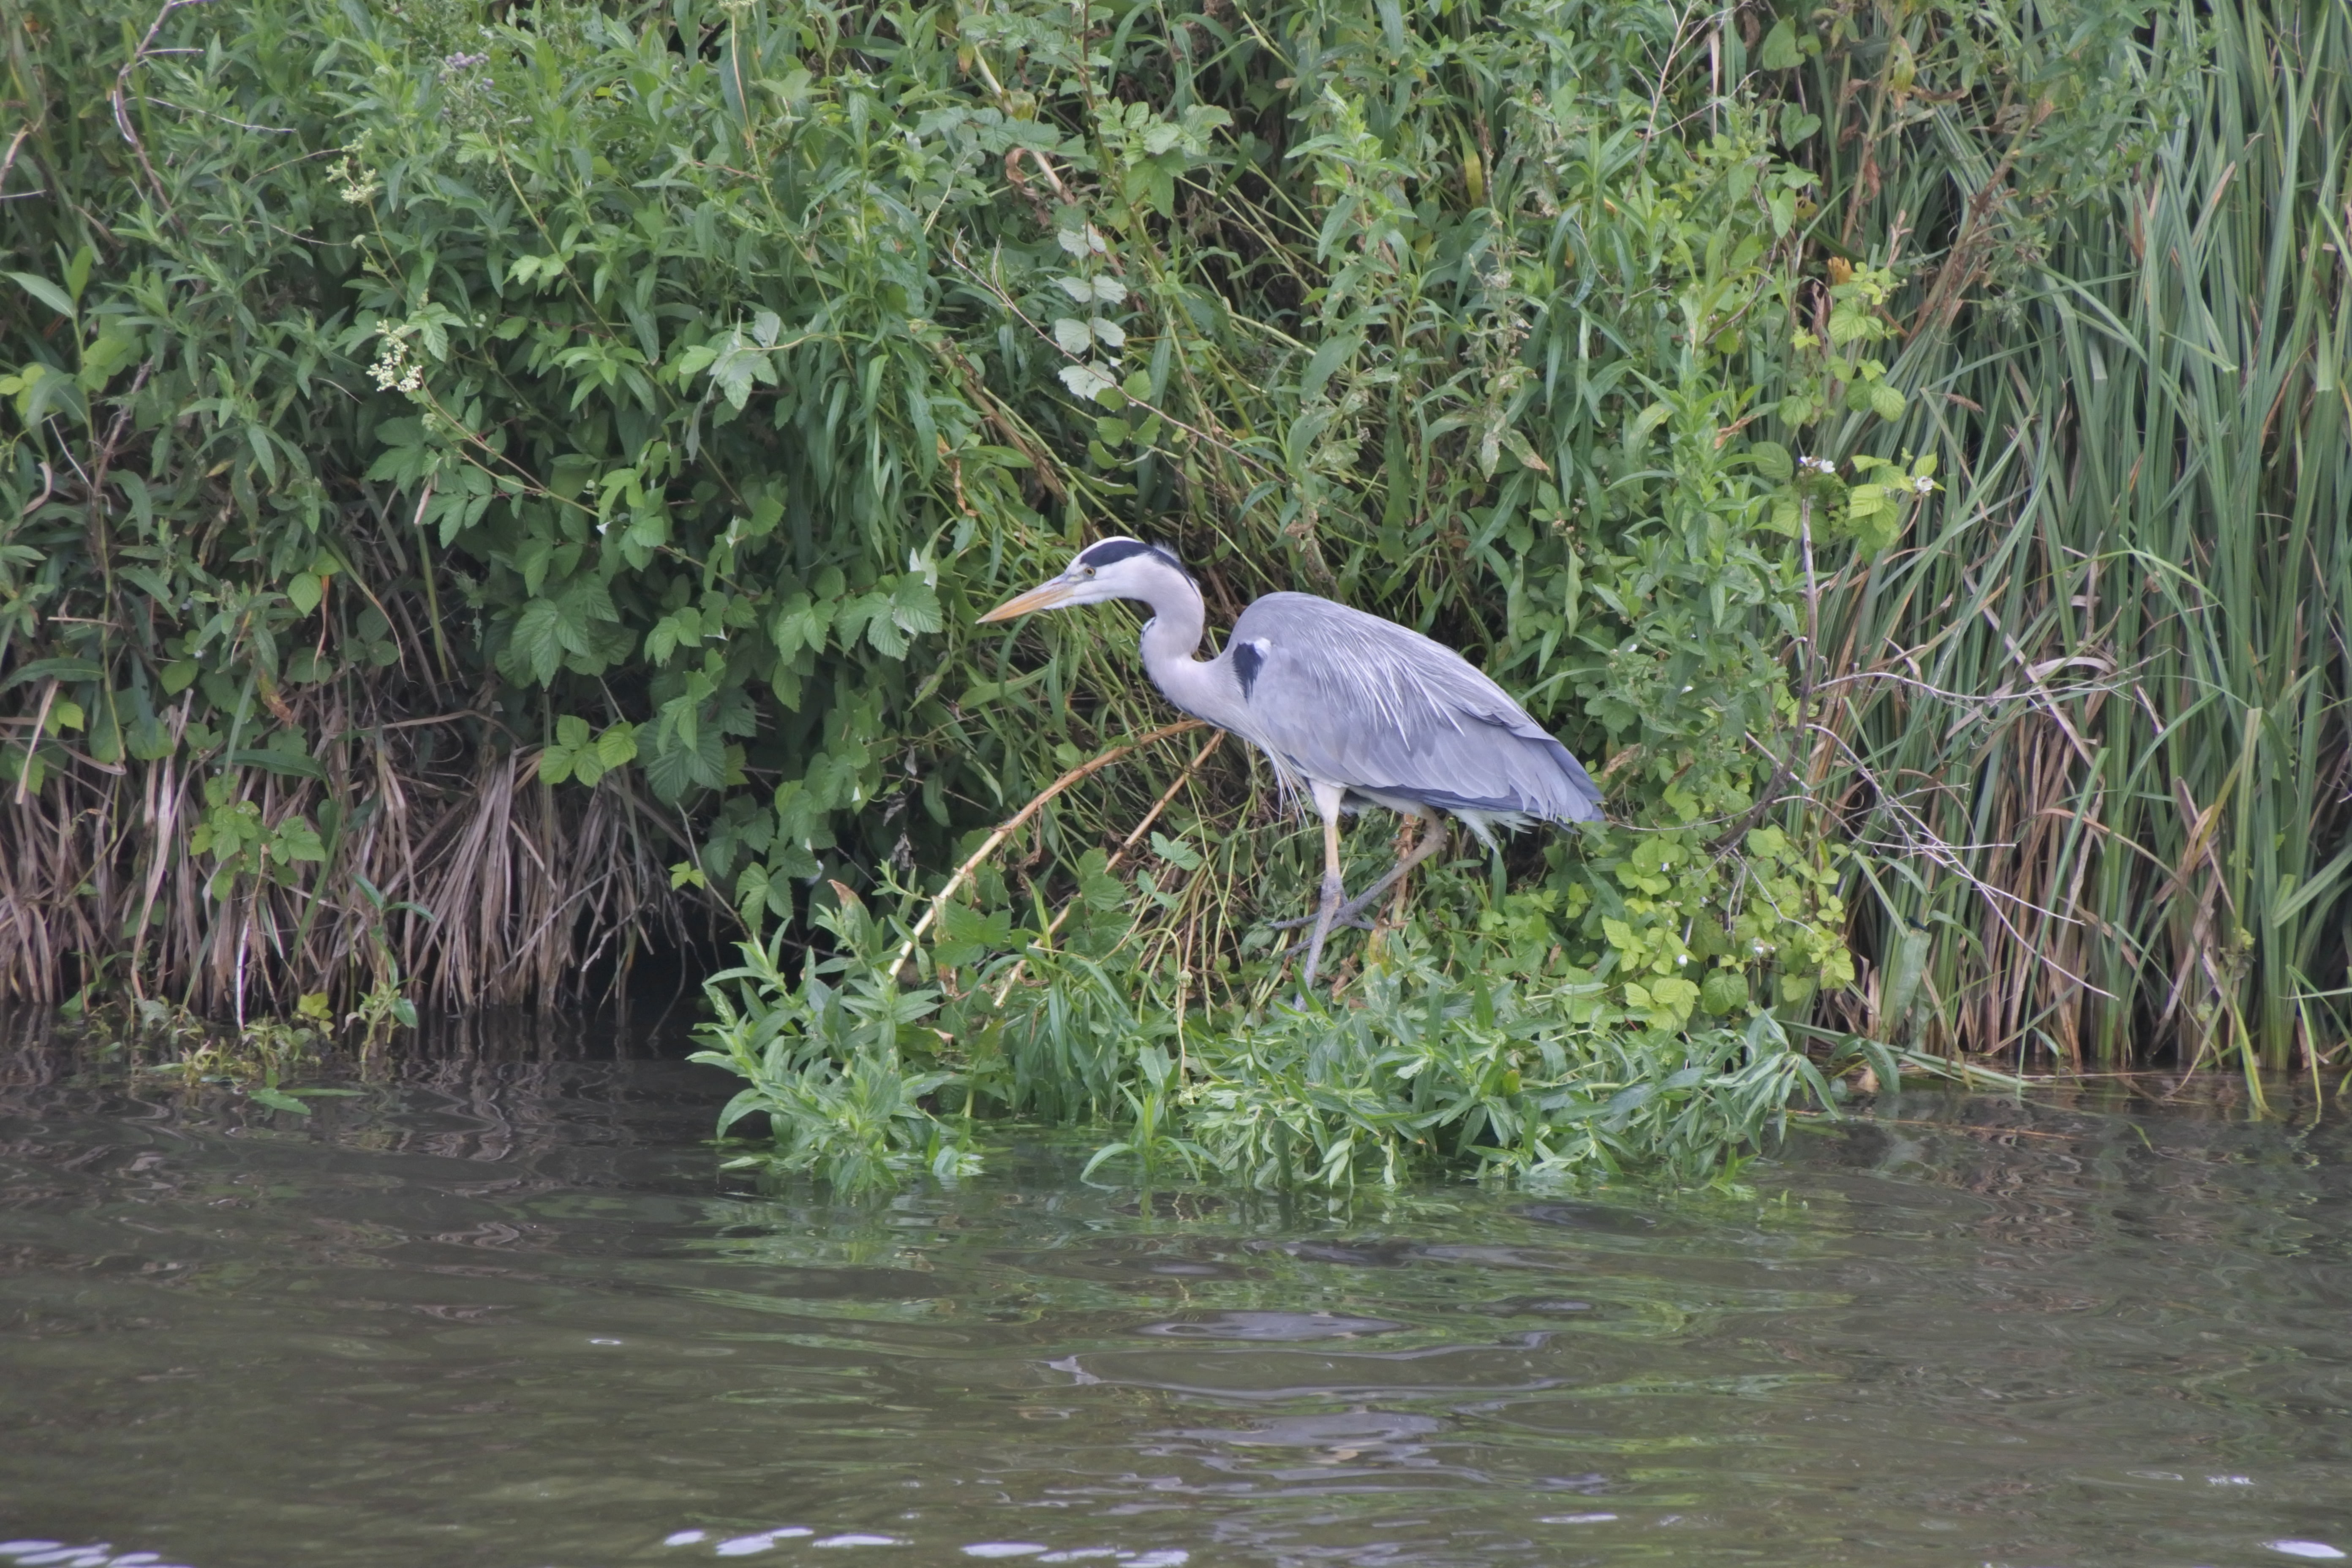 Grey Heron looking for lunch